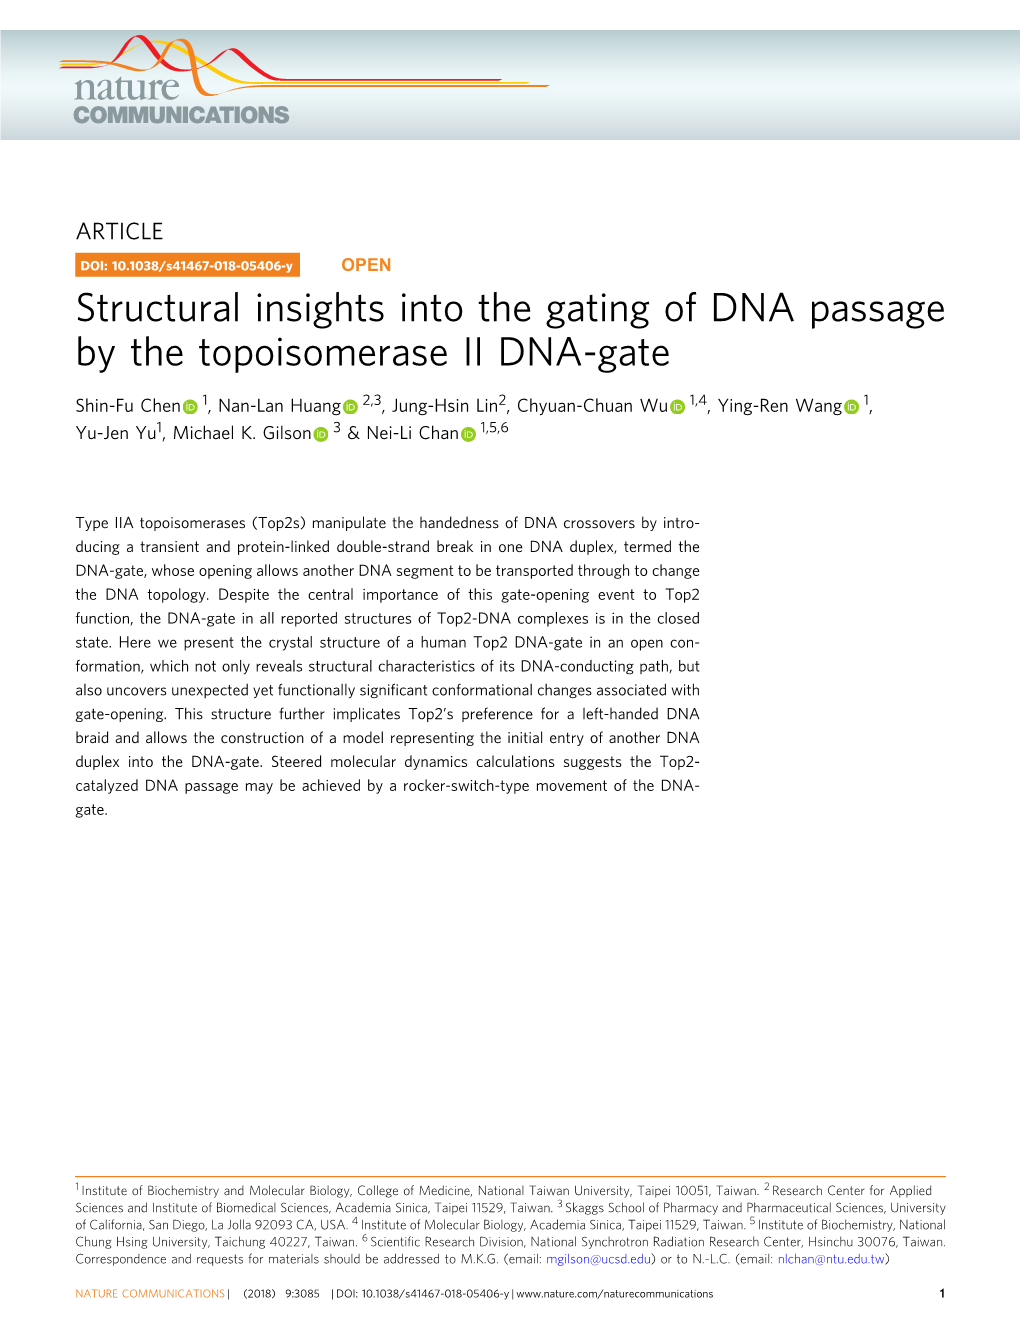 Structural Insights Into the Gating of DNA Passage by the Topoisomerase II DNA-Gate